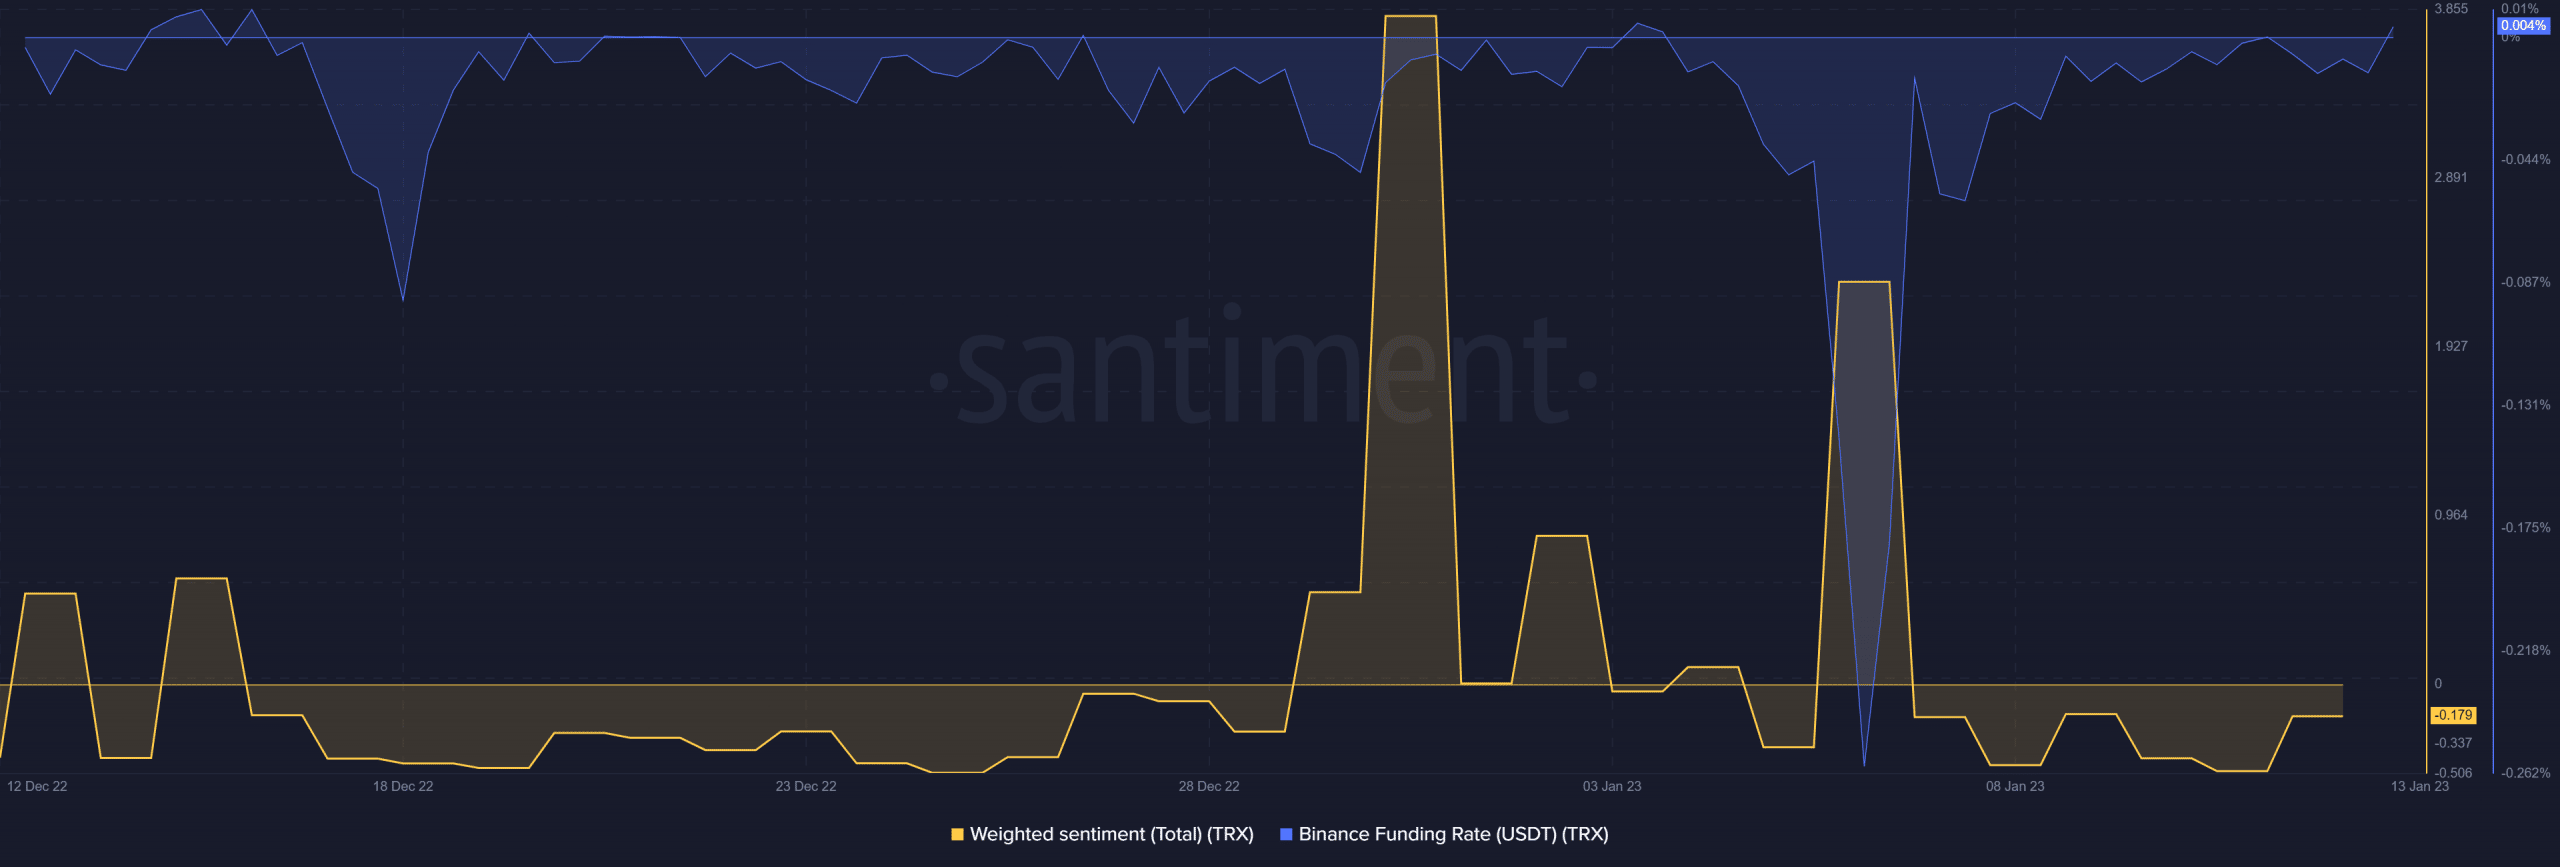 Tron weighted sentiment and Binance funding rate 